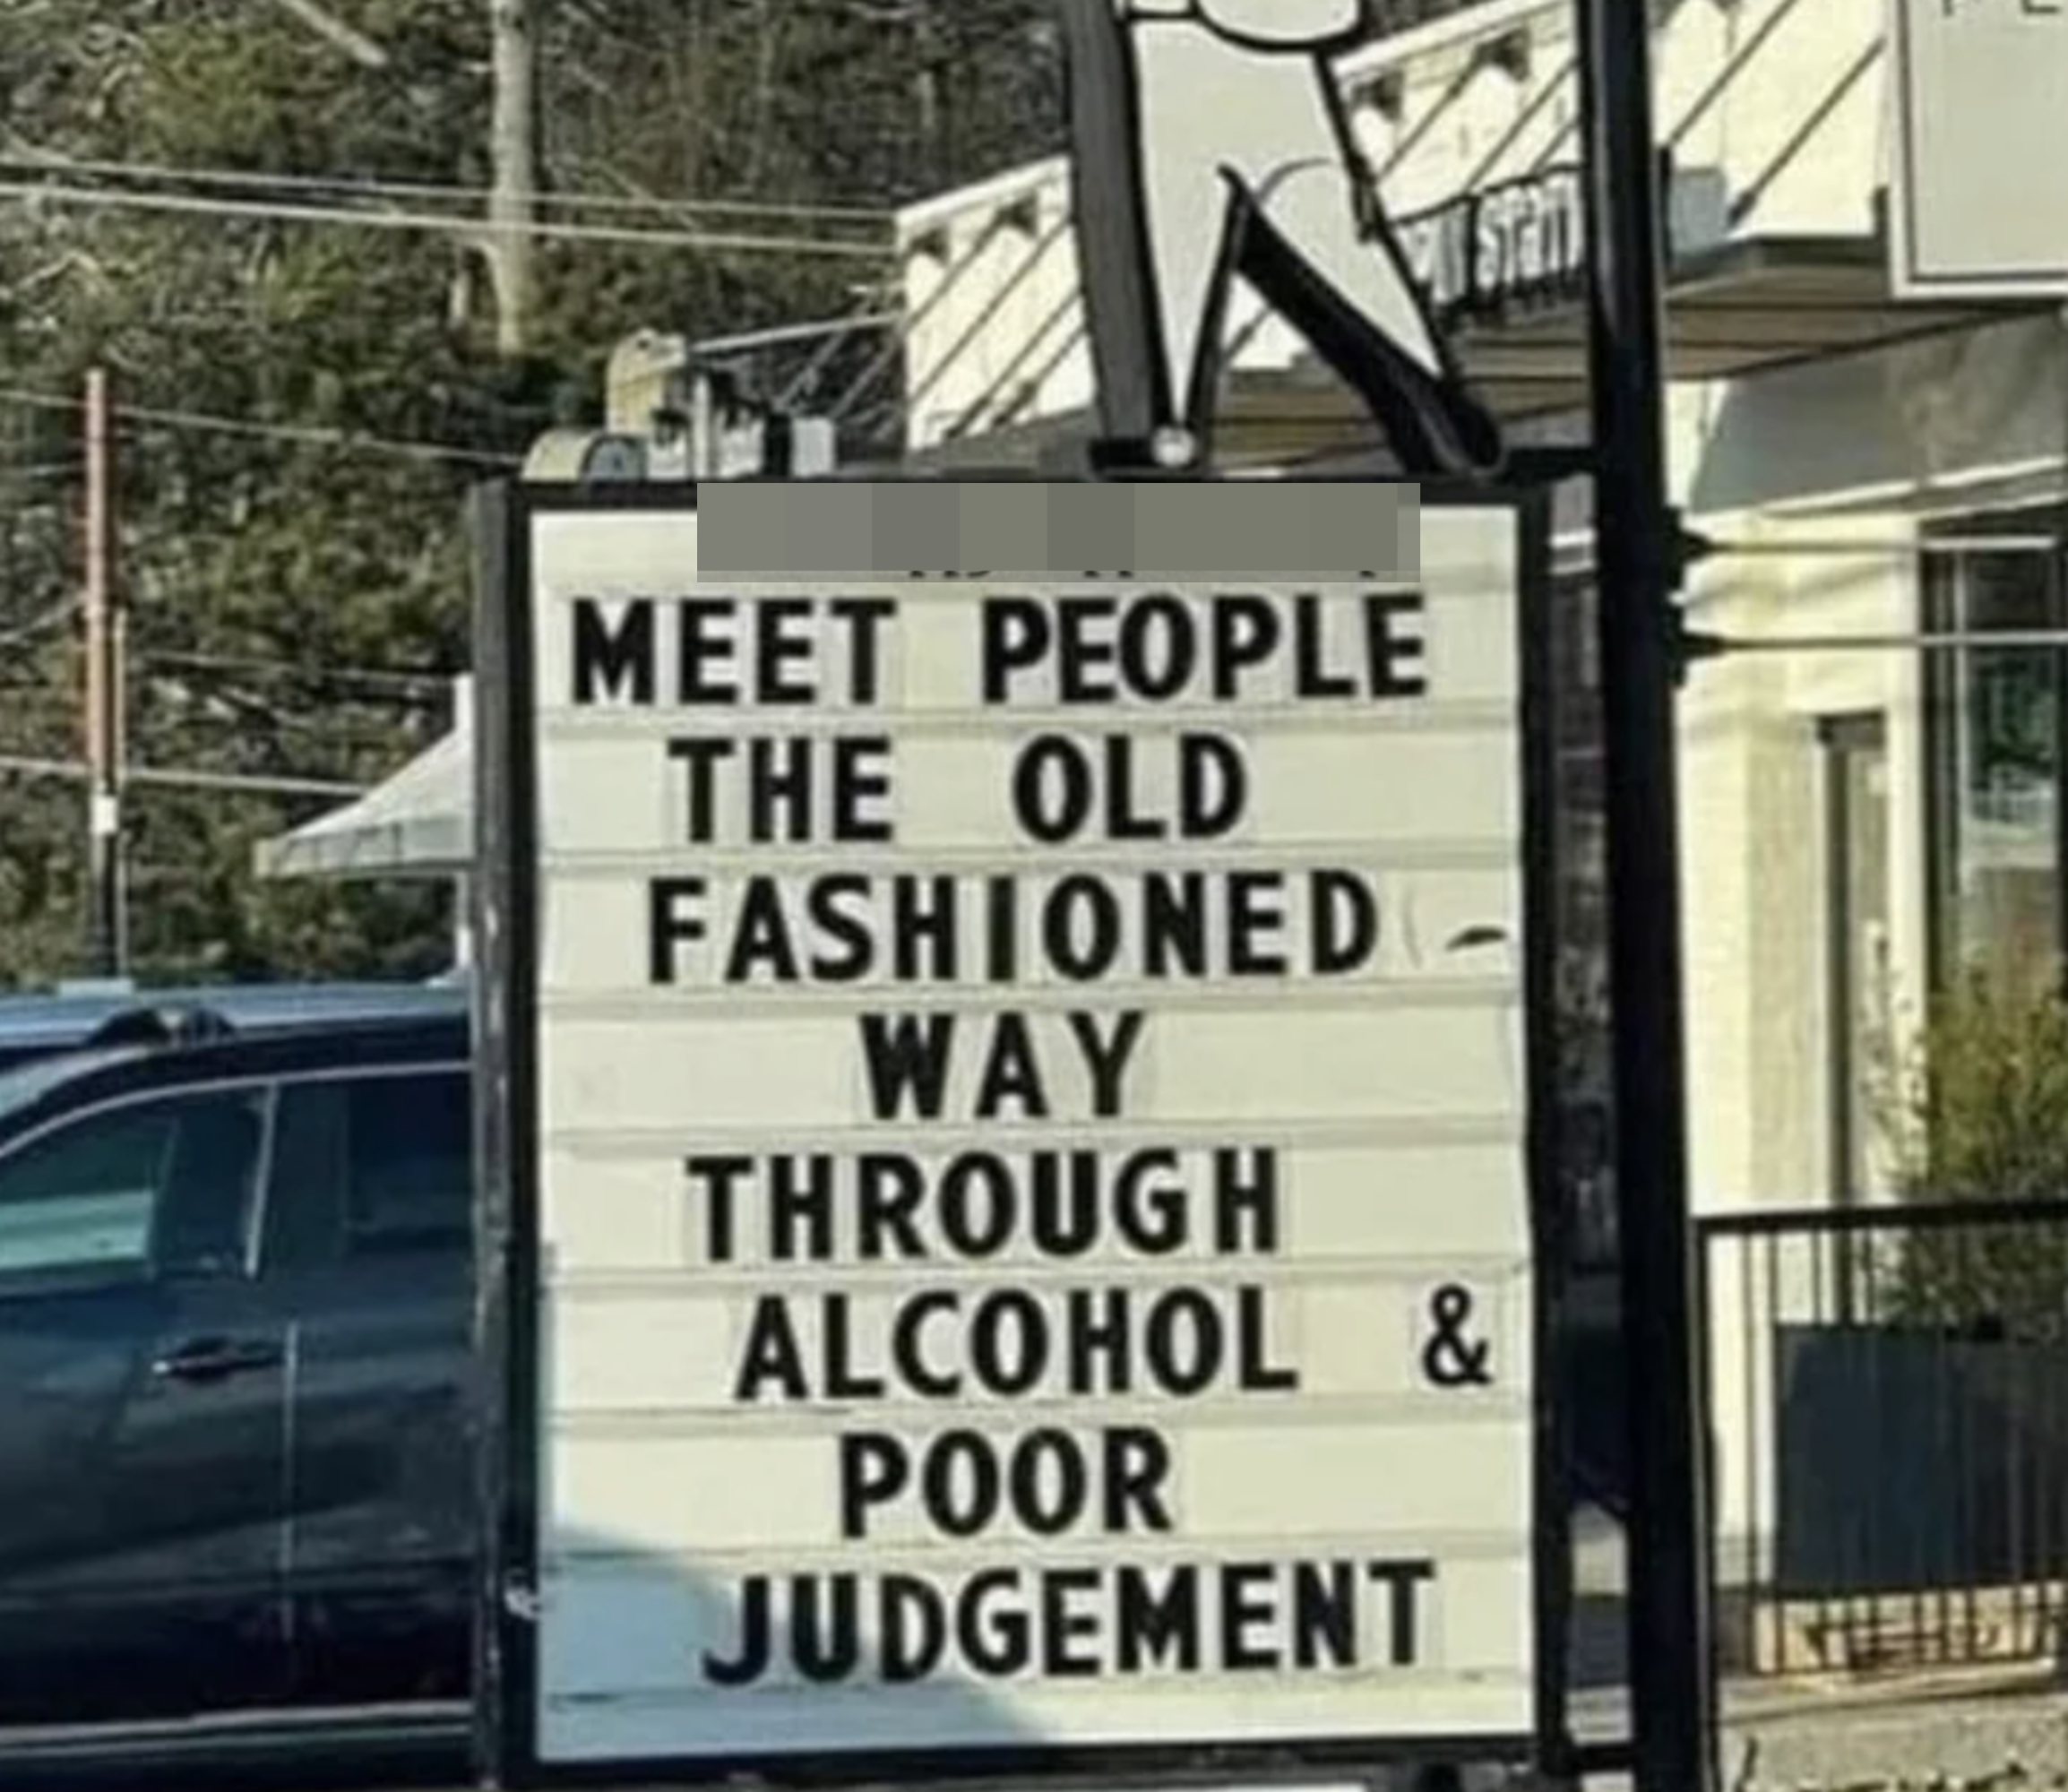 &quot;Meet people the old-fashioned way: through alcohol and poor judgment&quot;